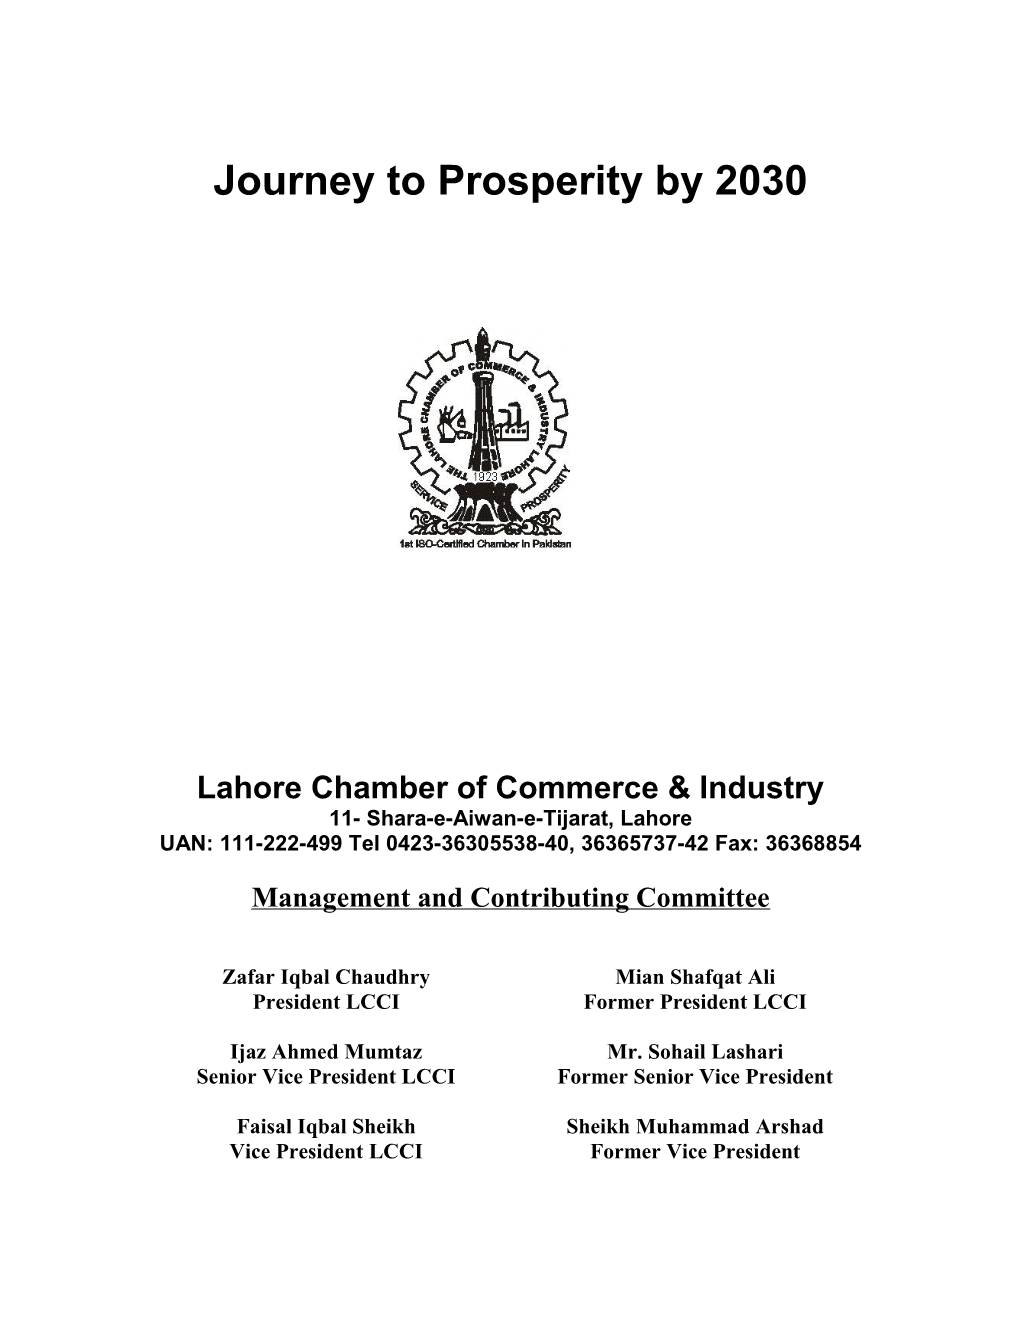 Lahore Chamber of Commerce Industry